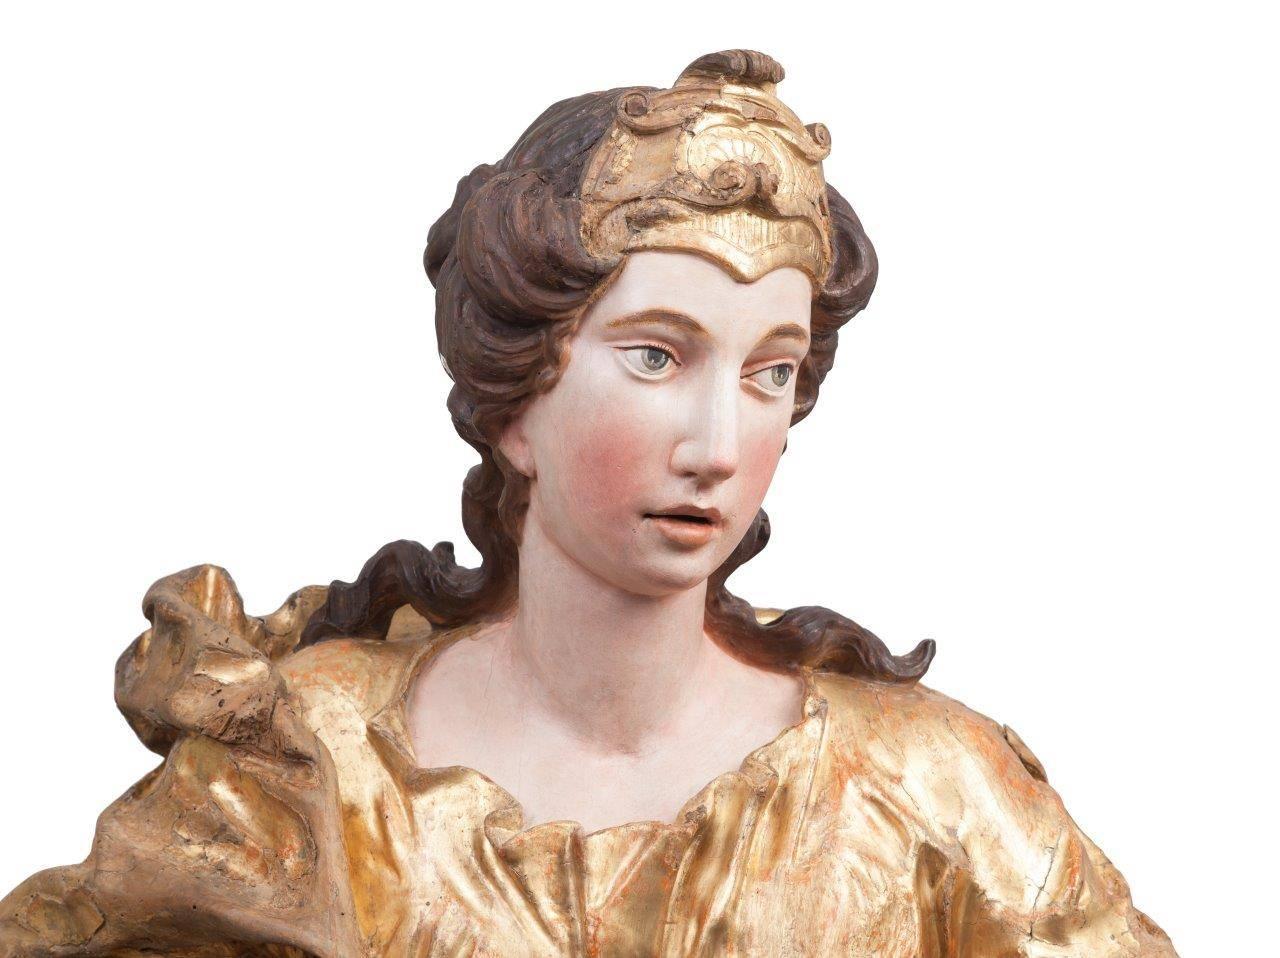 These two sculptures date from the 17th century and they are an beautiful example of baroque art. 
Both figures are nearly lifesize and have an impressive and highly decorative character. The sculptures are carved and polychrome and gilding can be